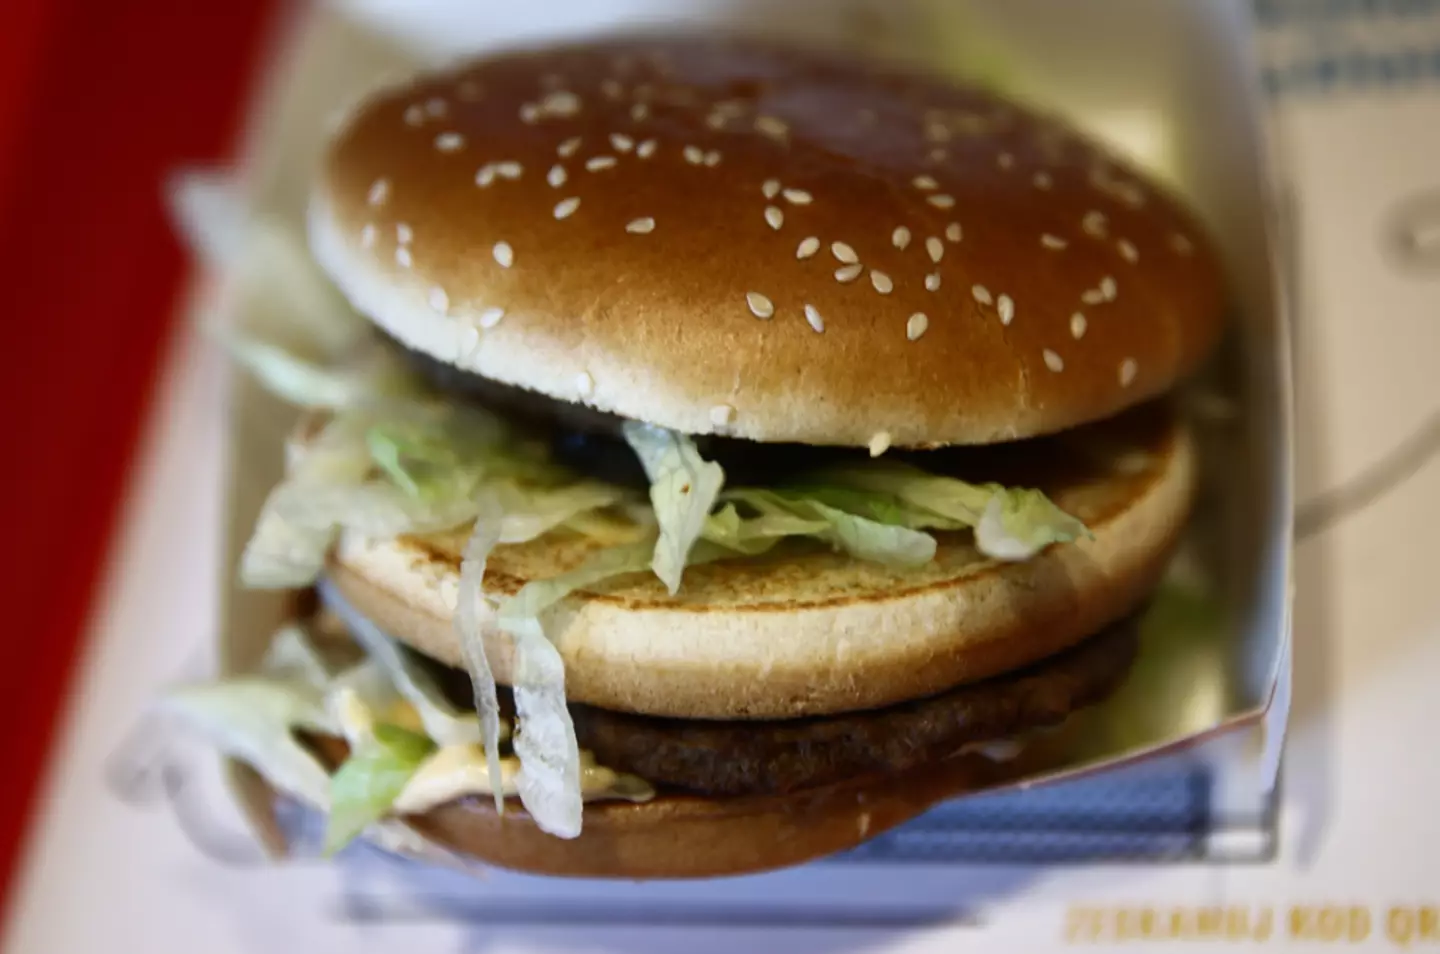 The fast food chain has promised the 'best burgers ever'.